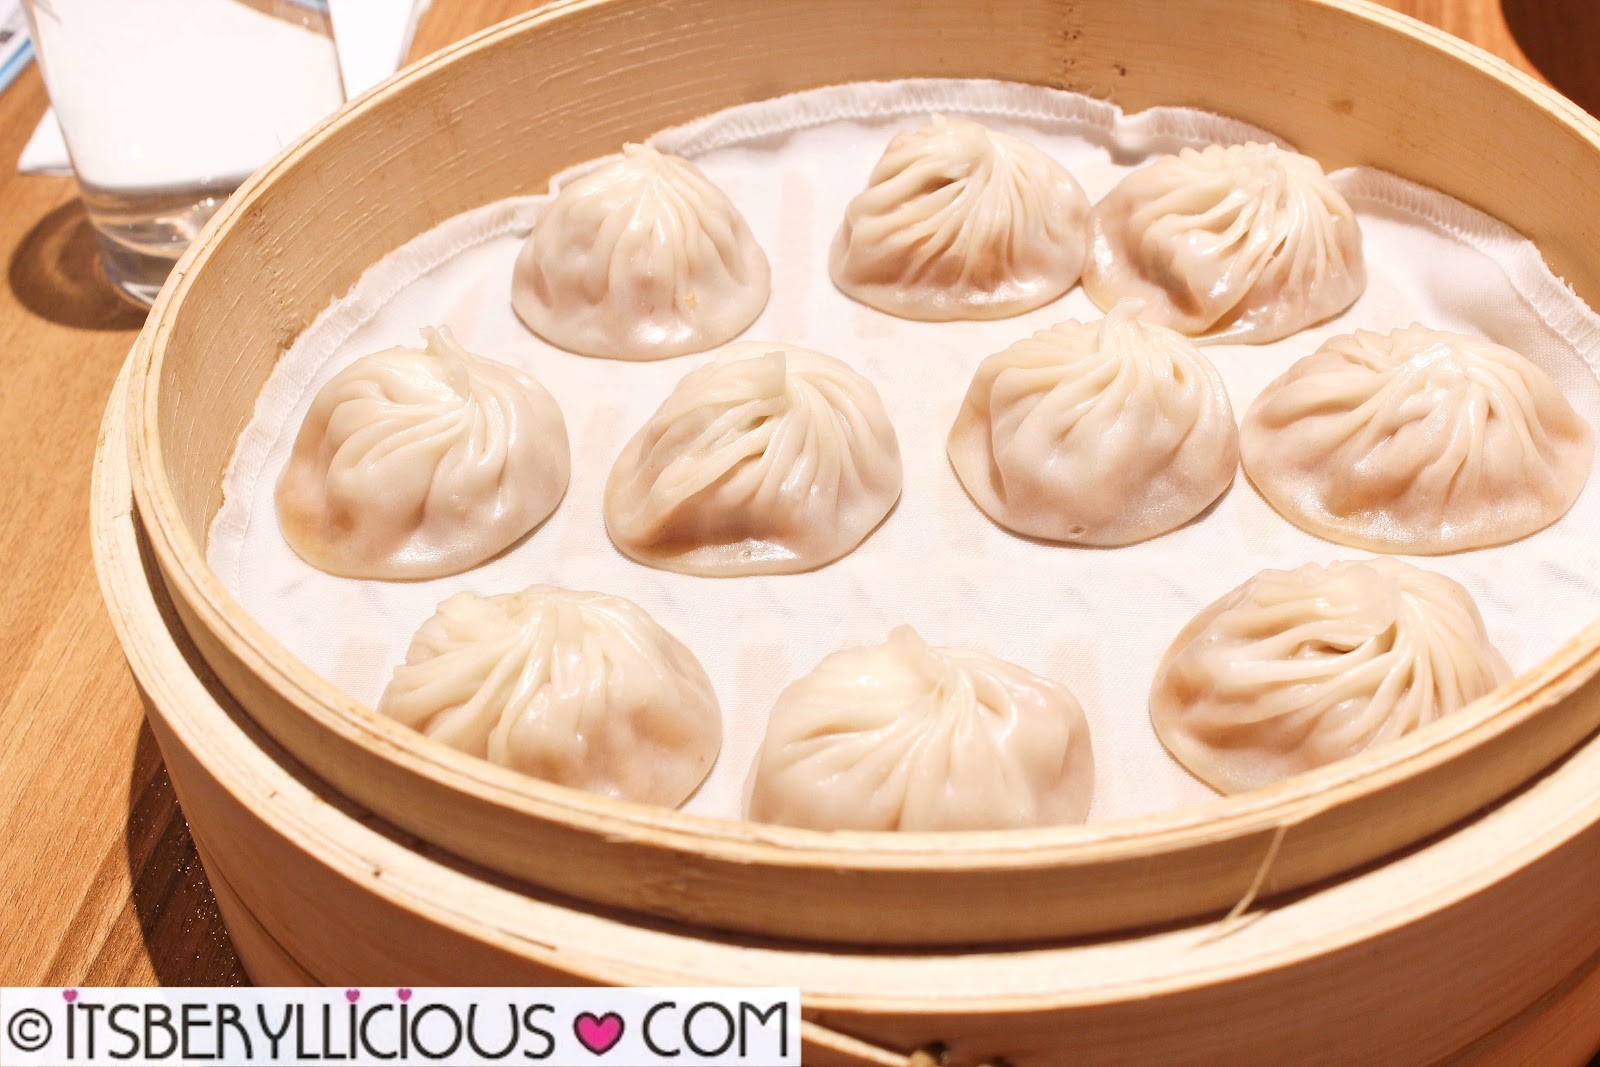 Din Tai Fung Taiwan's Famous Xiao Long Bao Now in the Philippines- SM